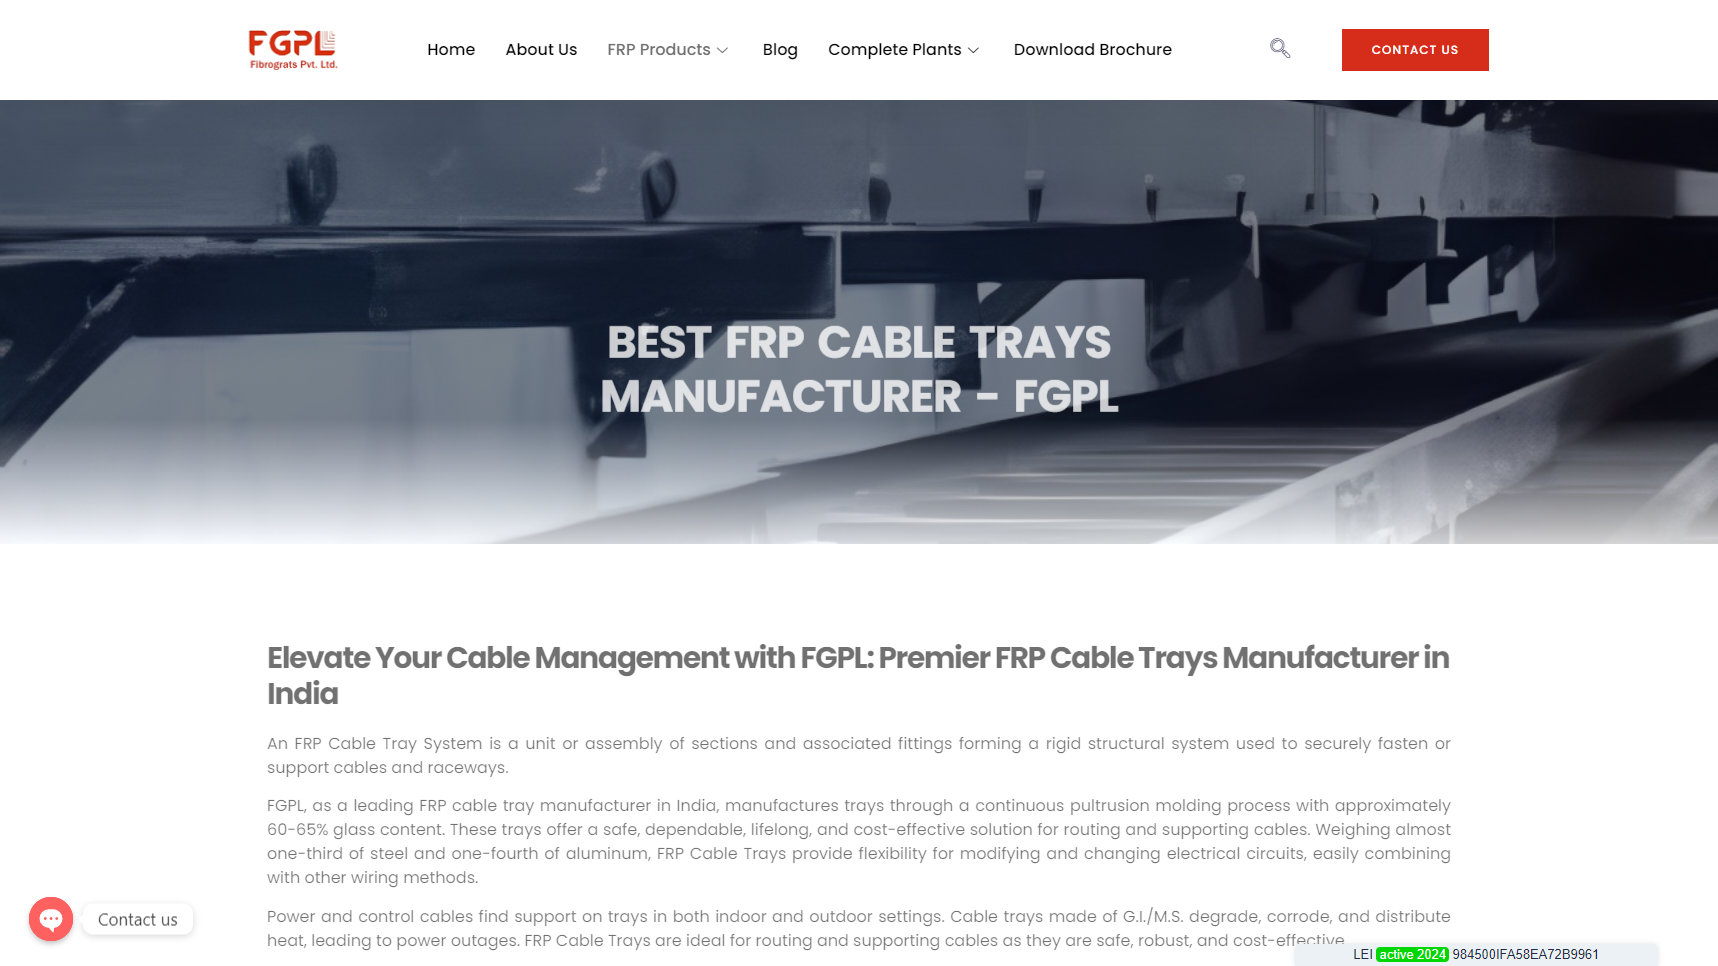 Fibrograts - Cable Tray Manufacturer